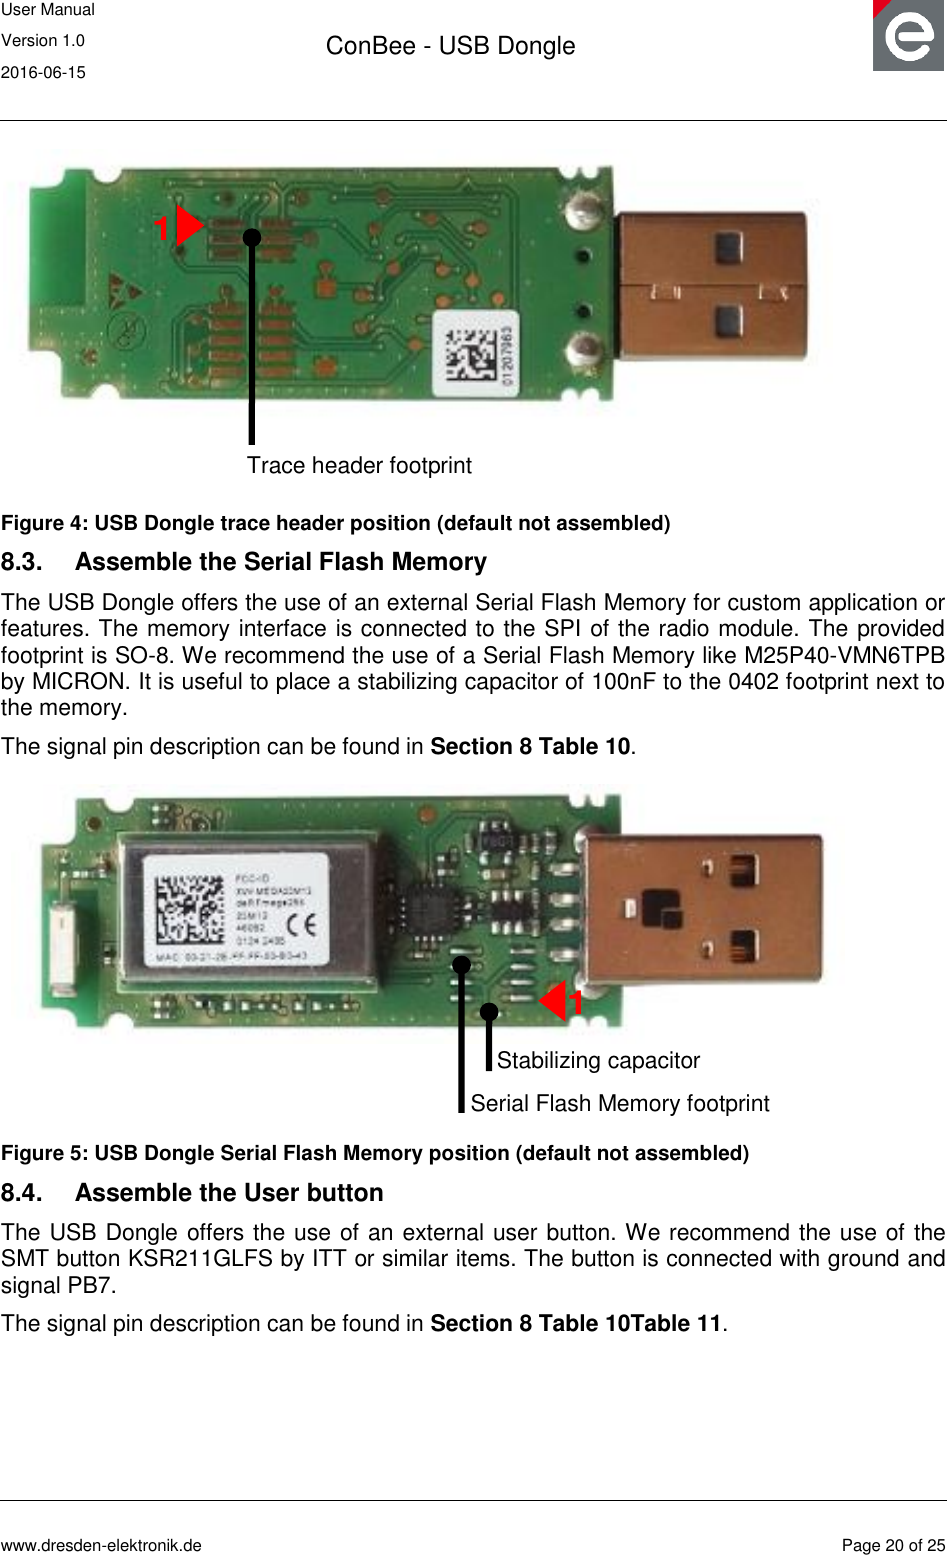 User Manual Version 1.0 2016-06-15  ConBee - USB Dongle      www.dresden-elektronik.de  Page 20 of 25   Figure 4: USB Dongle trace header position (default not assembled) 8.3.  Assemble the Serial Flash Memory The USB Dongle offers the use of an external Serial Flash Memory for custom application or features. The memory interface is connected to the SPI of the radio module. The provided footprint is SO-8. We recommend the use of a Serial Flash Memory like M25P40-VMN6TPB by MICRON. It is useful to place a stabilizing capacitor of 100nF to the 0402 footprint next to the memory. The signal pin description can be found in Section 8 Table 10.  Figure 5: USB Dongle Serial Flash Memory position (default not assembled) 8.4.  Assemble the User button The USB Dongle offers the use of an external user button. We recommend the use of the SMT button KSR211GLFS by ITT or similar items. The button is connected with ground and signal PB7. The signal pin description can be found in Section 8 Table 10Table 11. Trace header footprint 1 Serial Flash Memory footprint 1 Stabilizing capacitor 